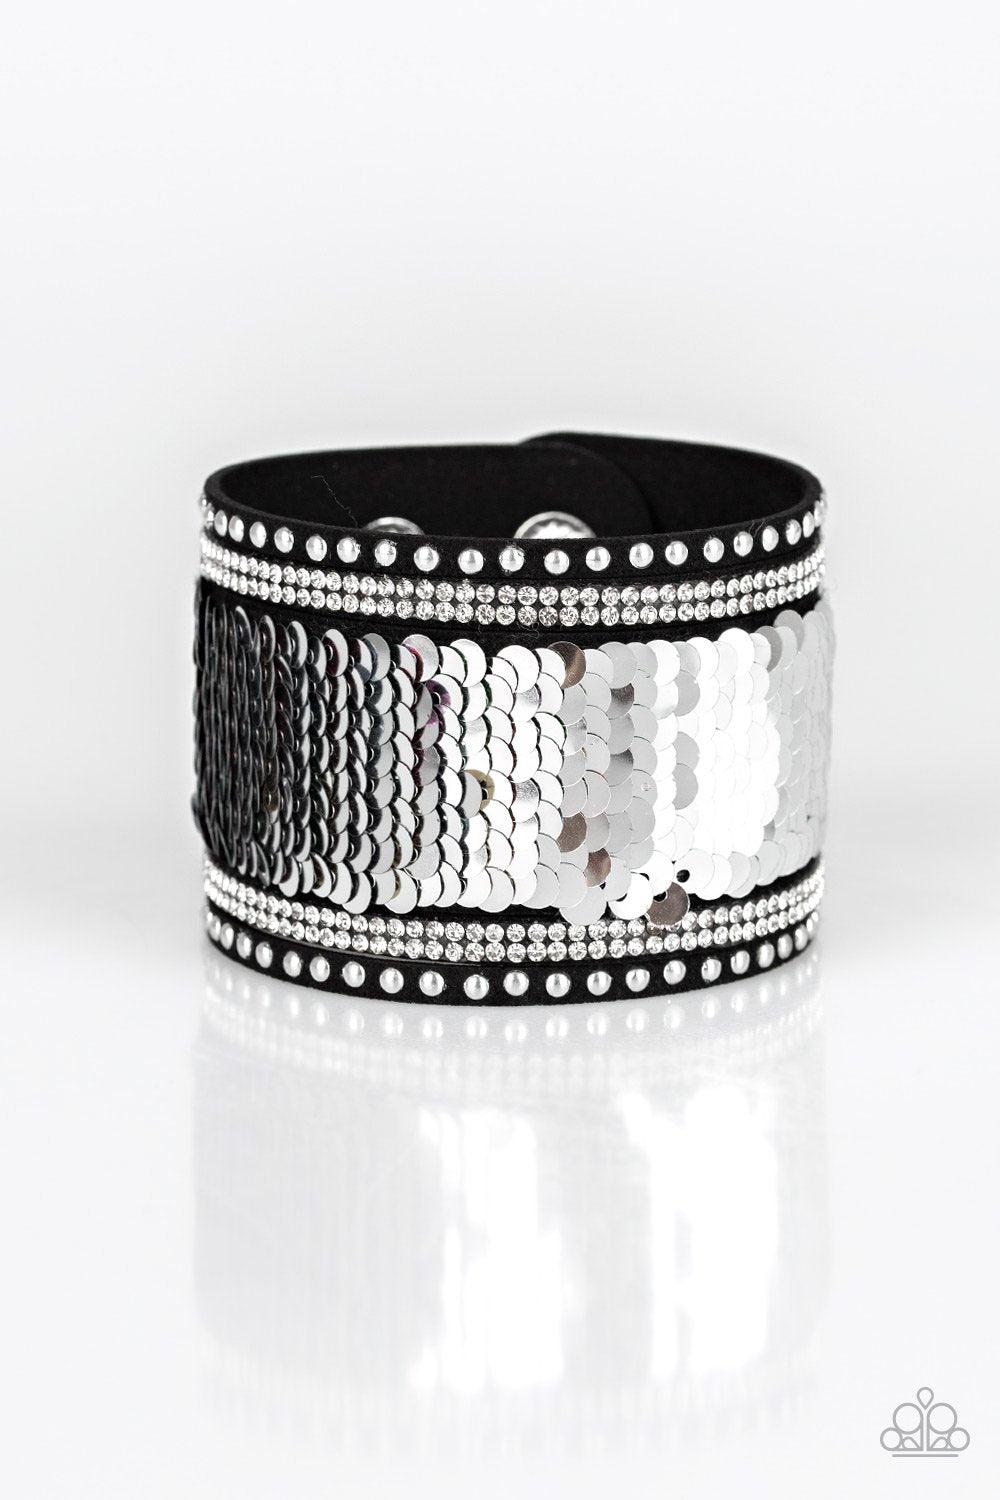 MERMAIDS Have More Fun Multicolor and Silver Sequin Reversible Urban Wrap Snap Bracelet - Paparazzi Accessories-CarasShop.com - $5 Jewelry by Cara Jewels